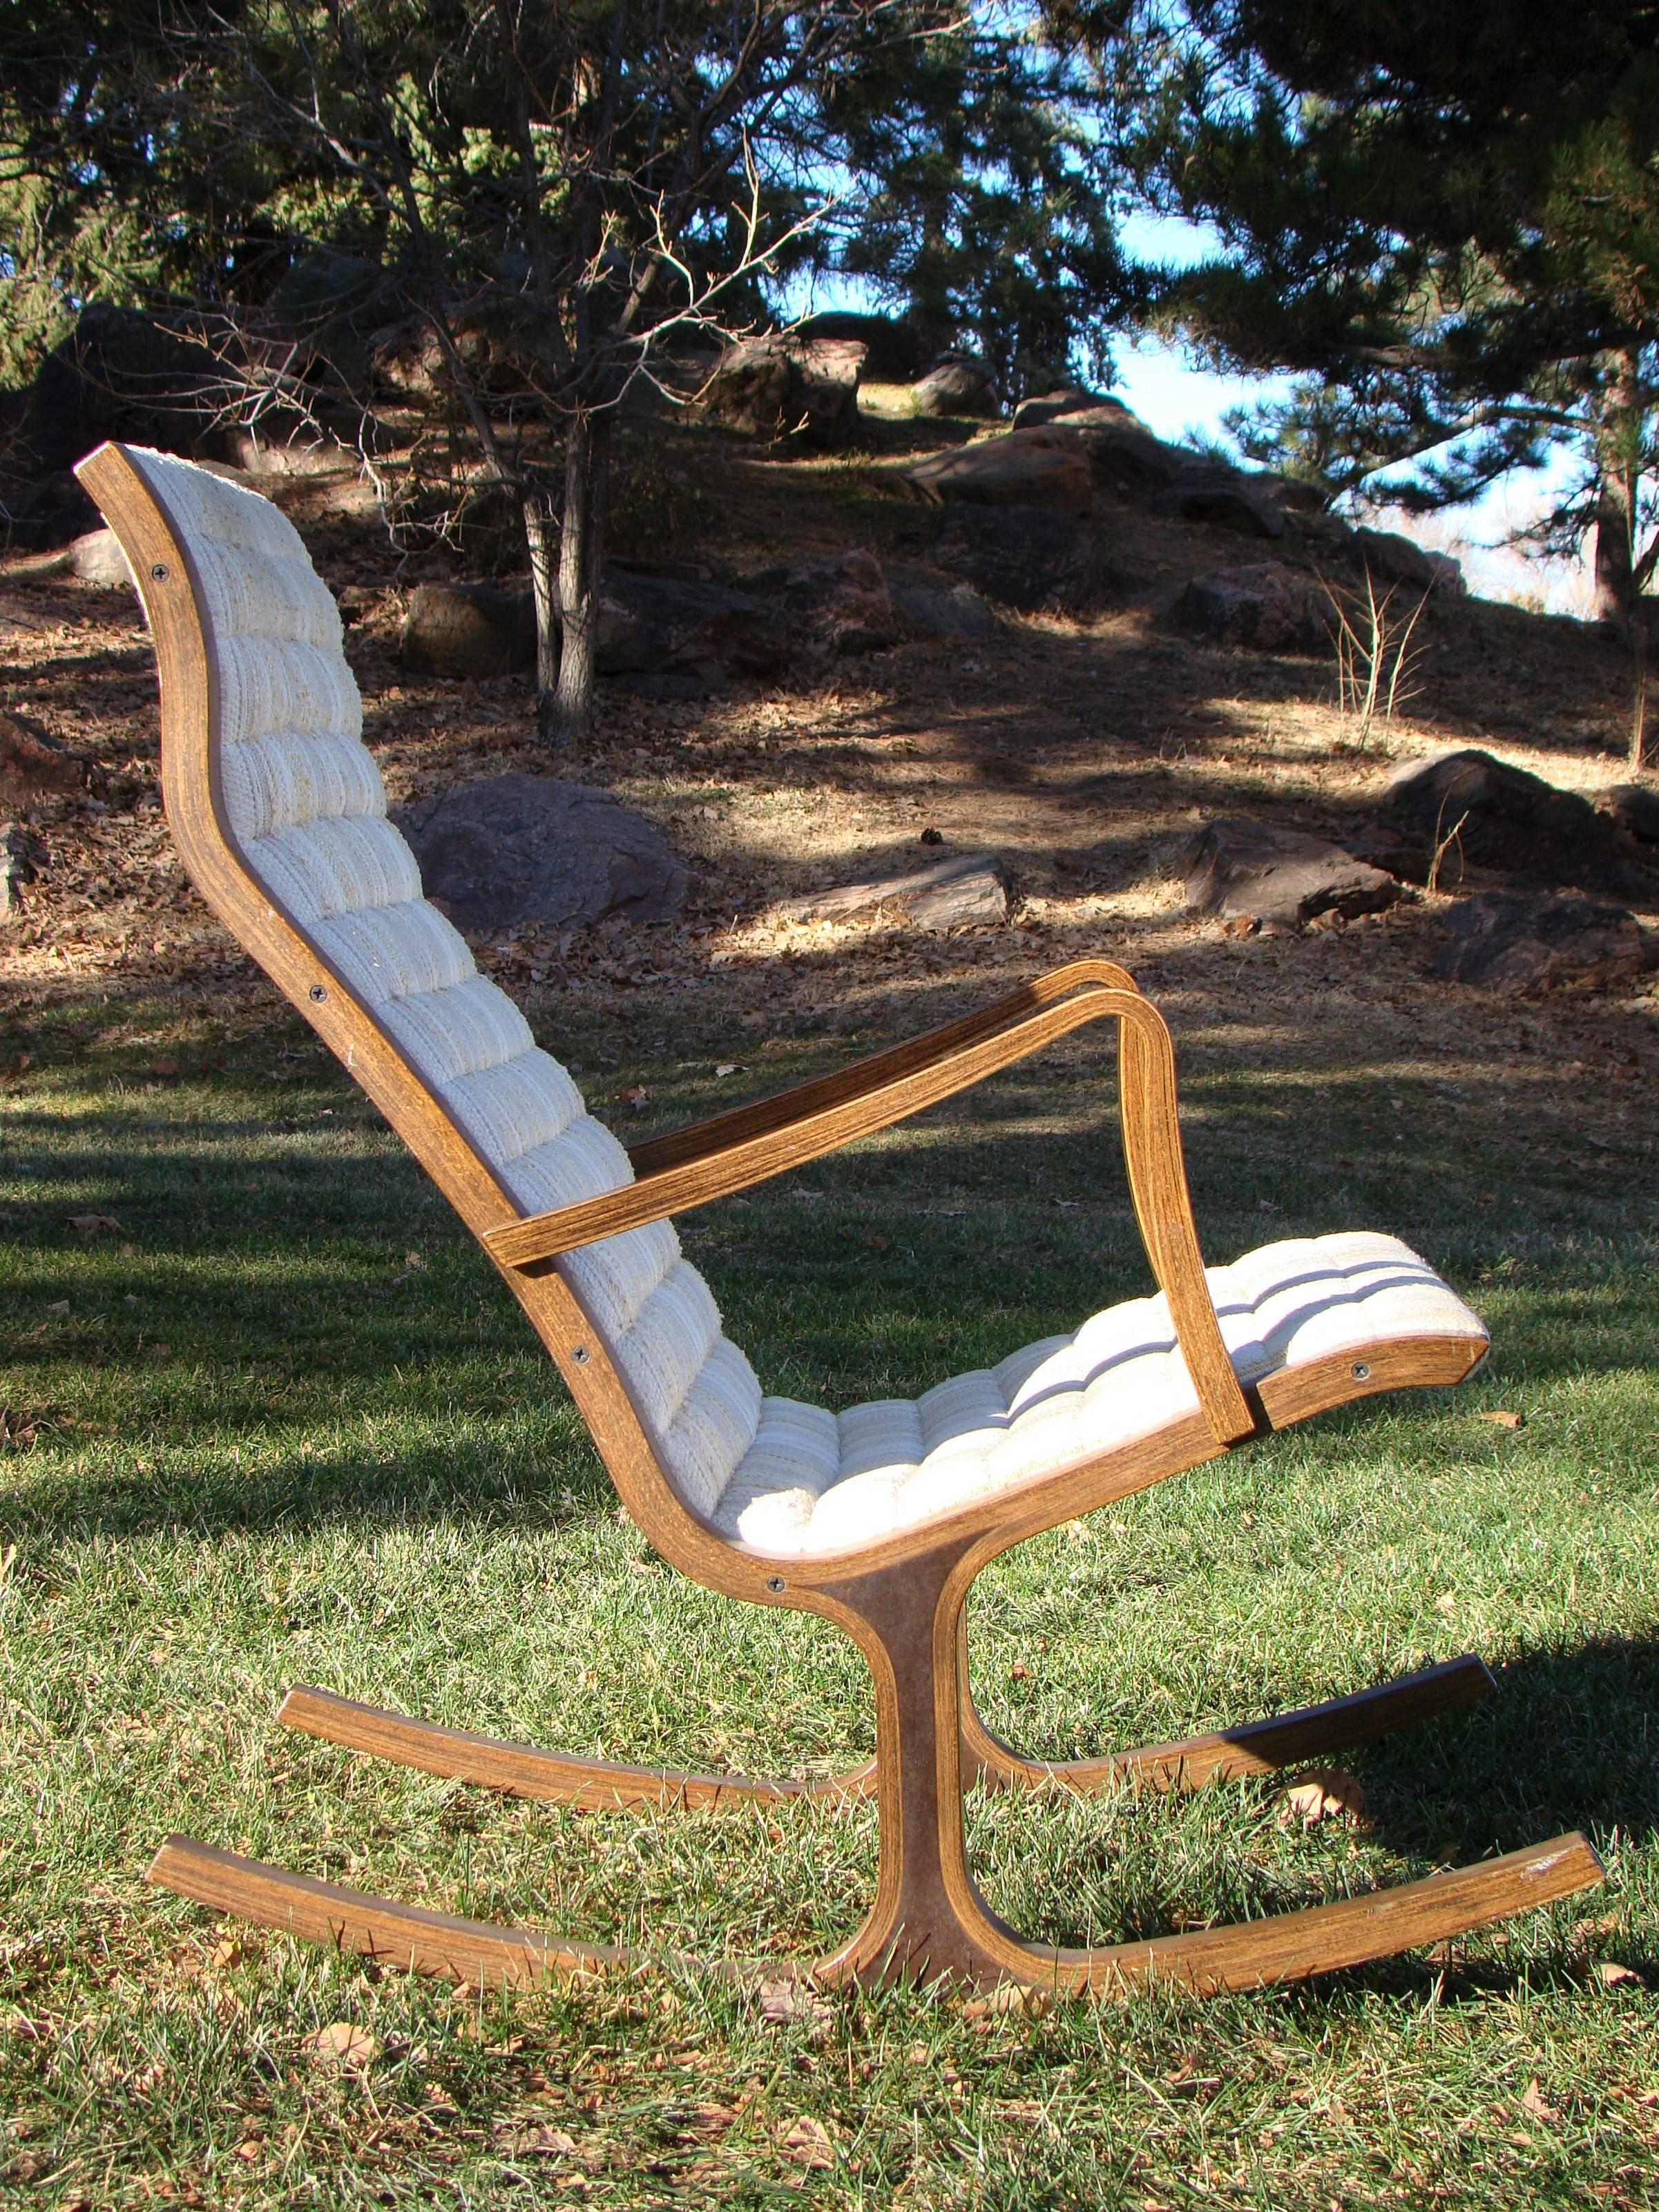 Sculptural Japanese Heron rocking chair, circa 1960s. In original upholstery. Marked on the underside with sticker.